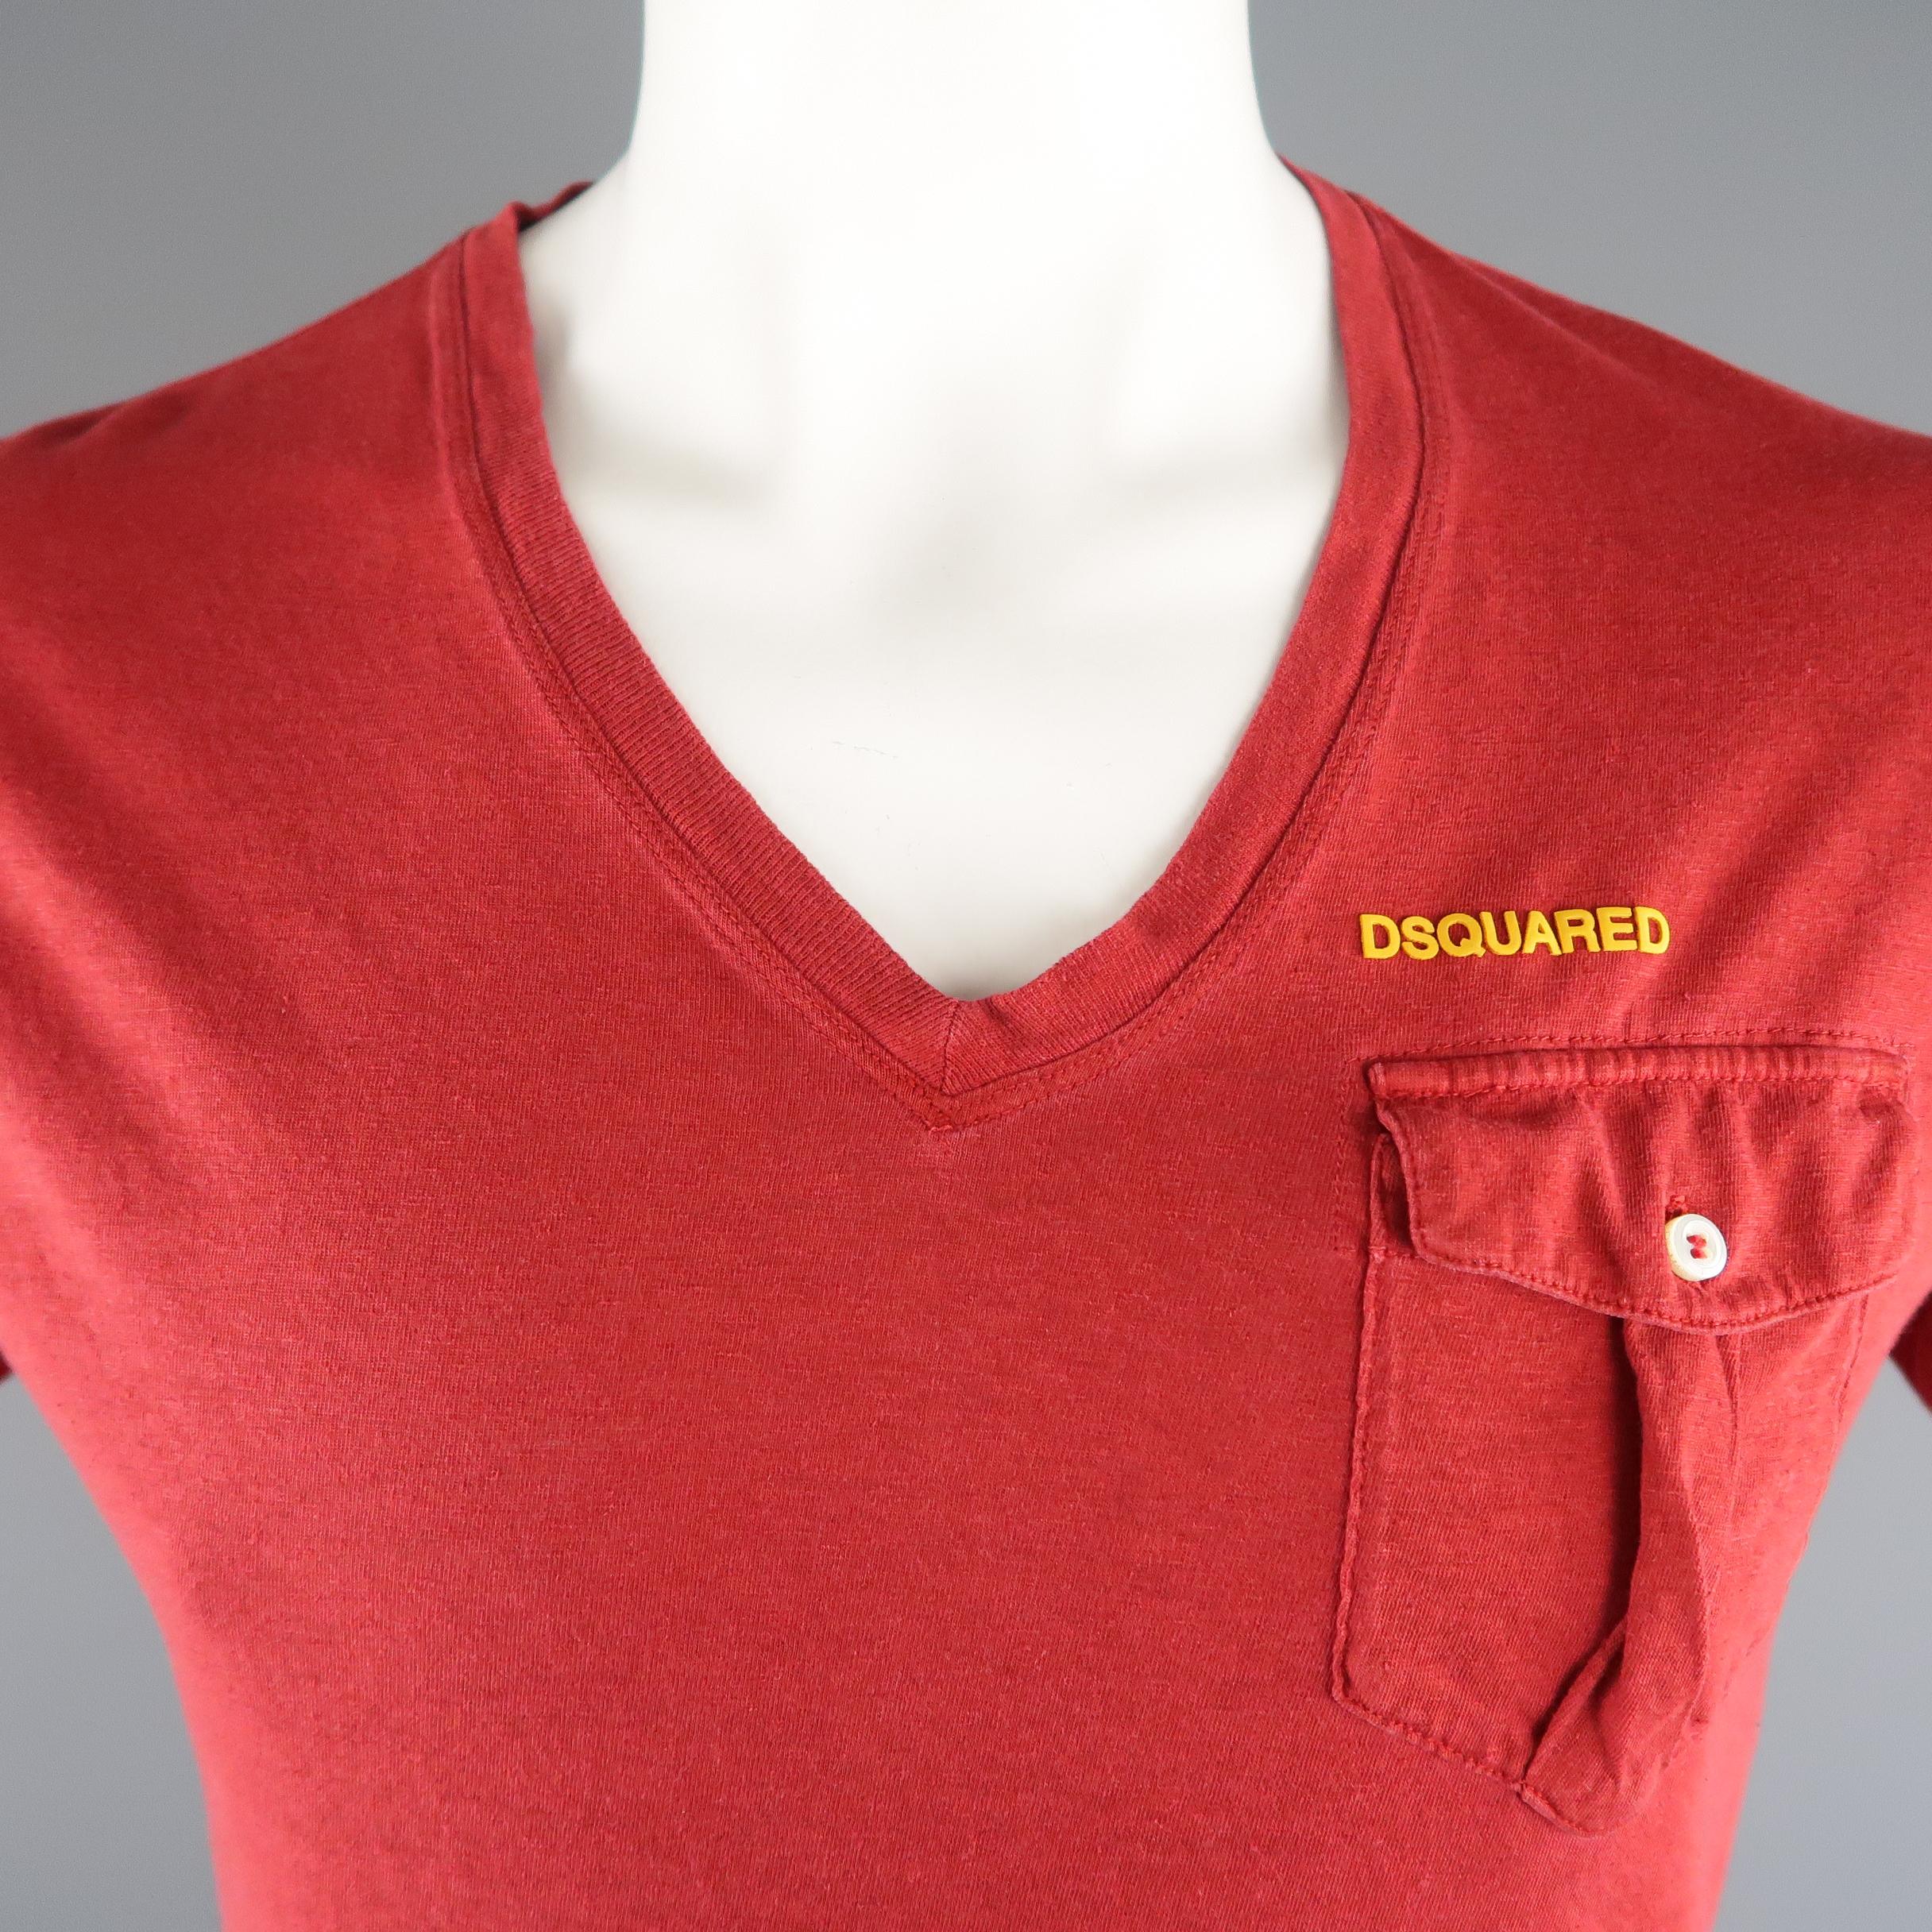 DSQUARED2 distressed T-shirt comes in a red solid cotton / linen material, with a V-neck, and a patch pocket. Made in Italy.
 
Excellent Pre-Owned Condition.
Marked: M
 
Measurements:
 
Shoulder: 17.5  in.  
Chest: 42  in.
Sleeve: 8.5  in.
Length: